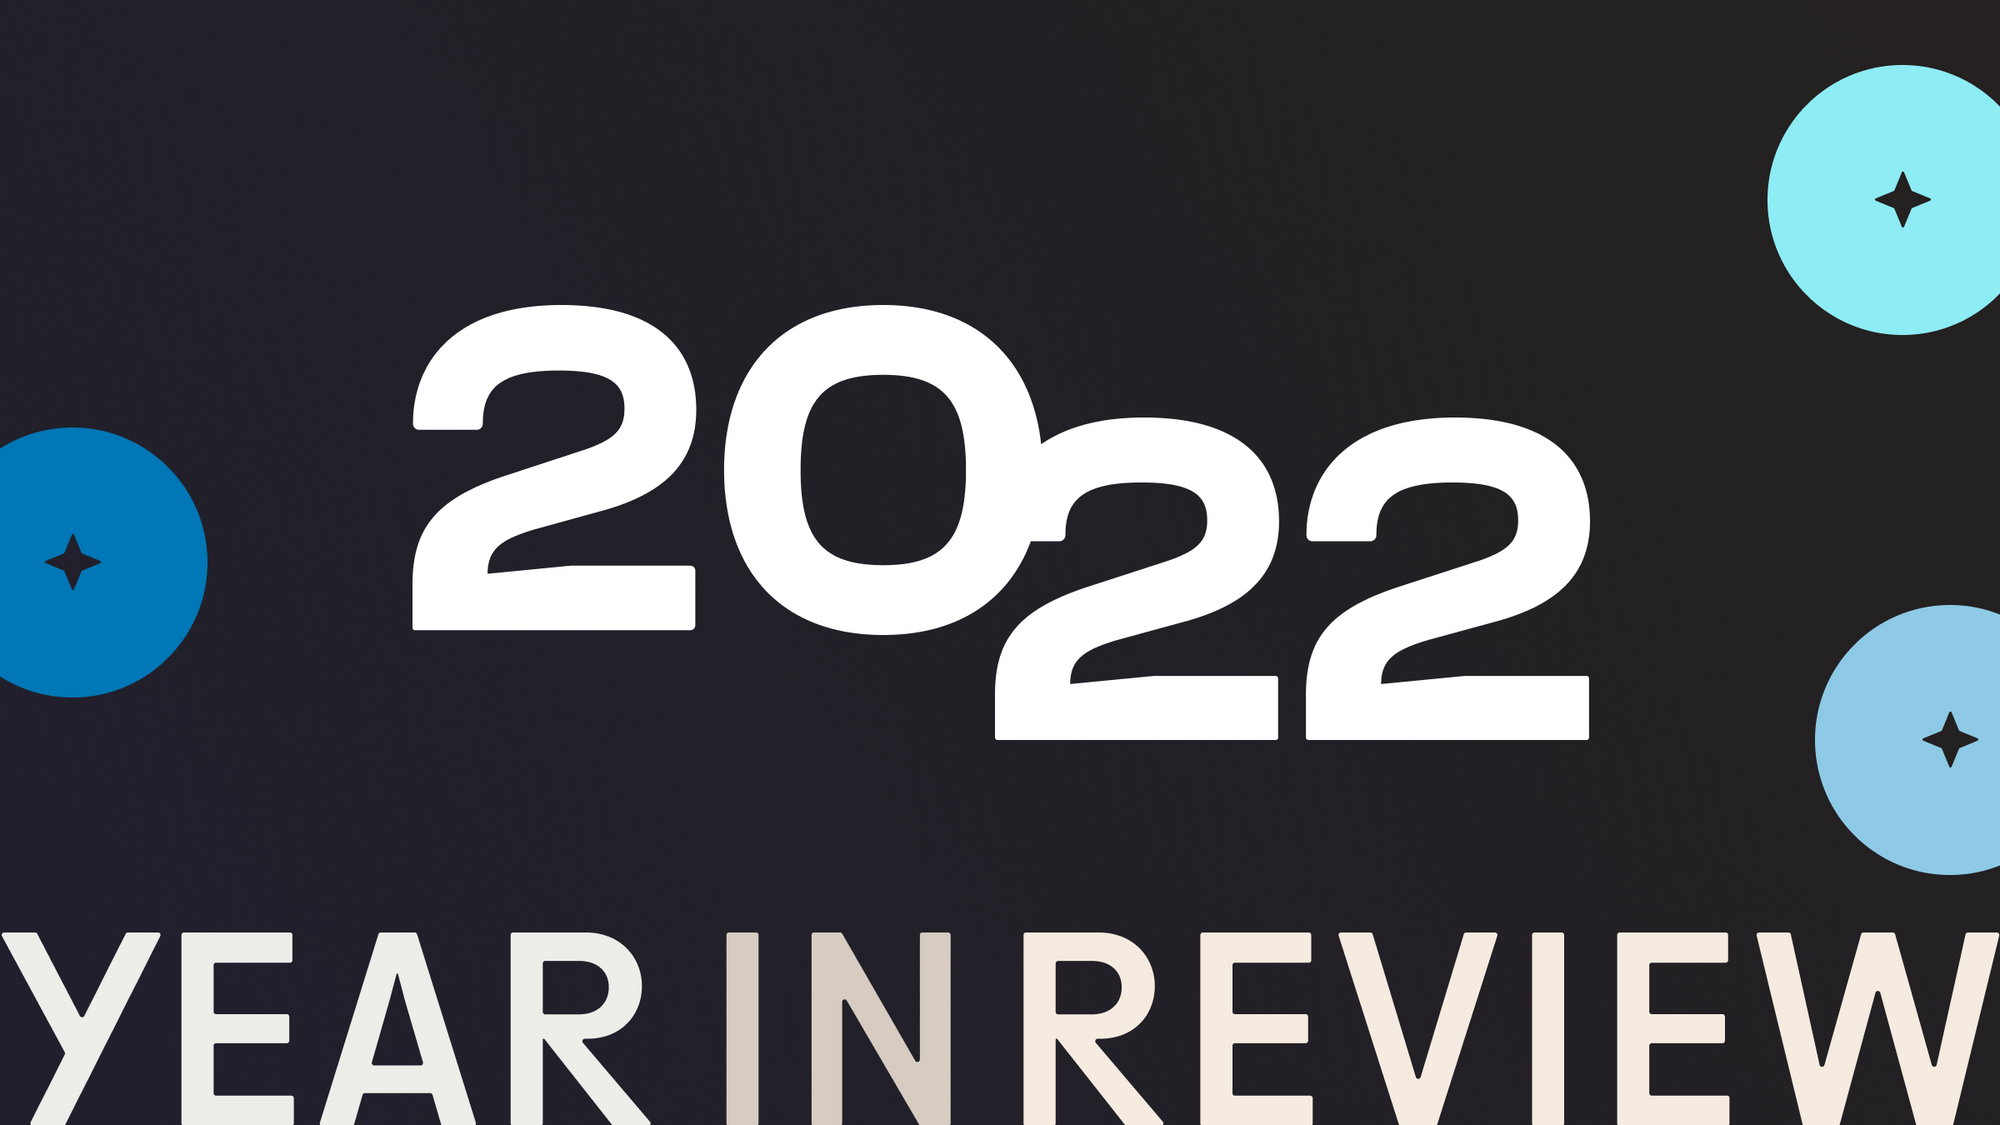 2022 at AssemblyAI - A Year in Review